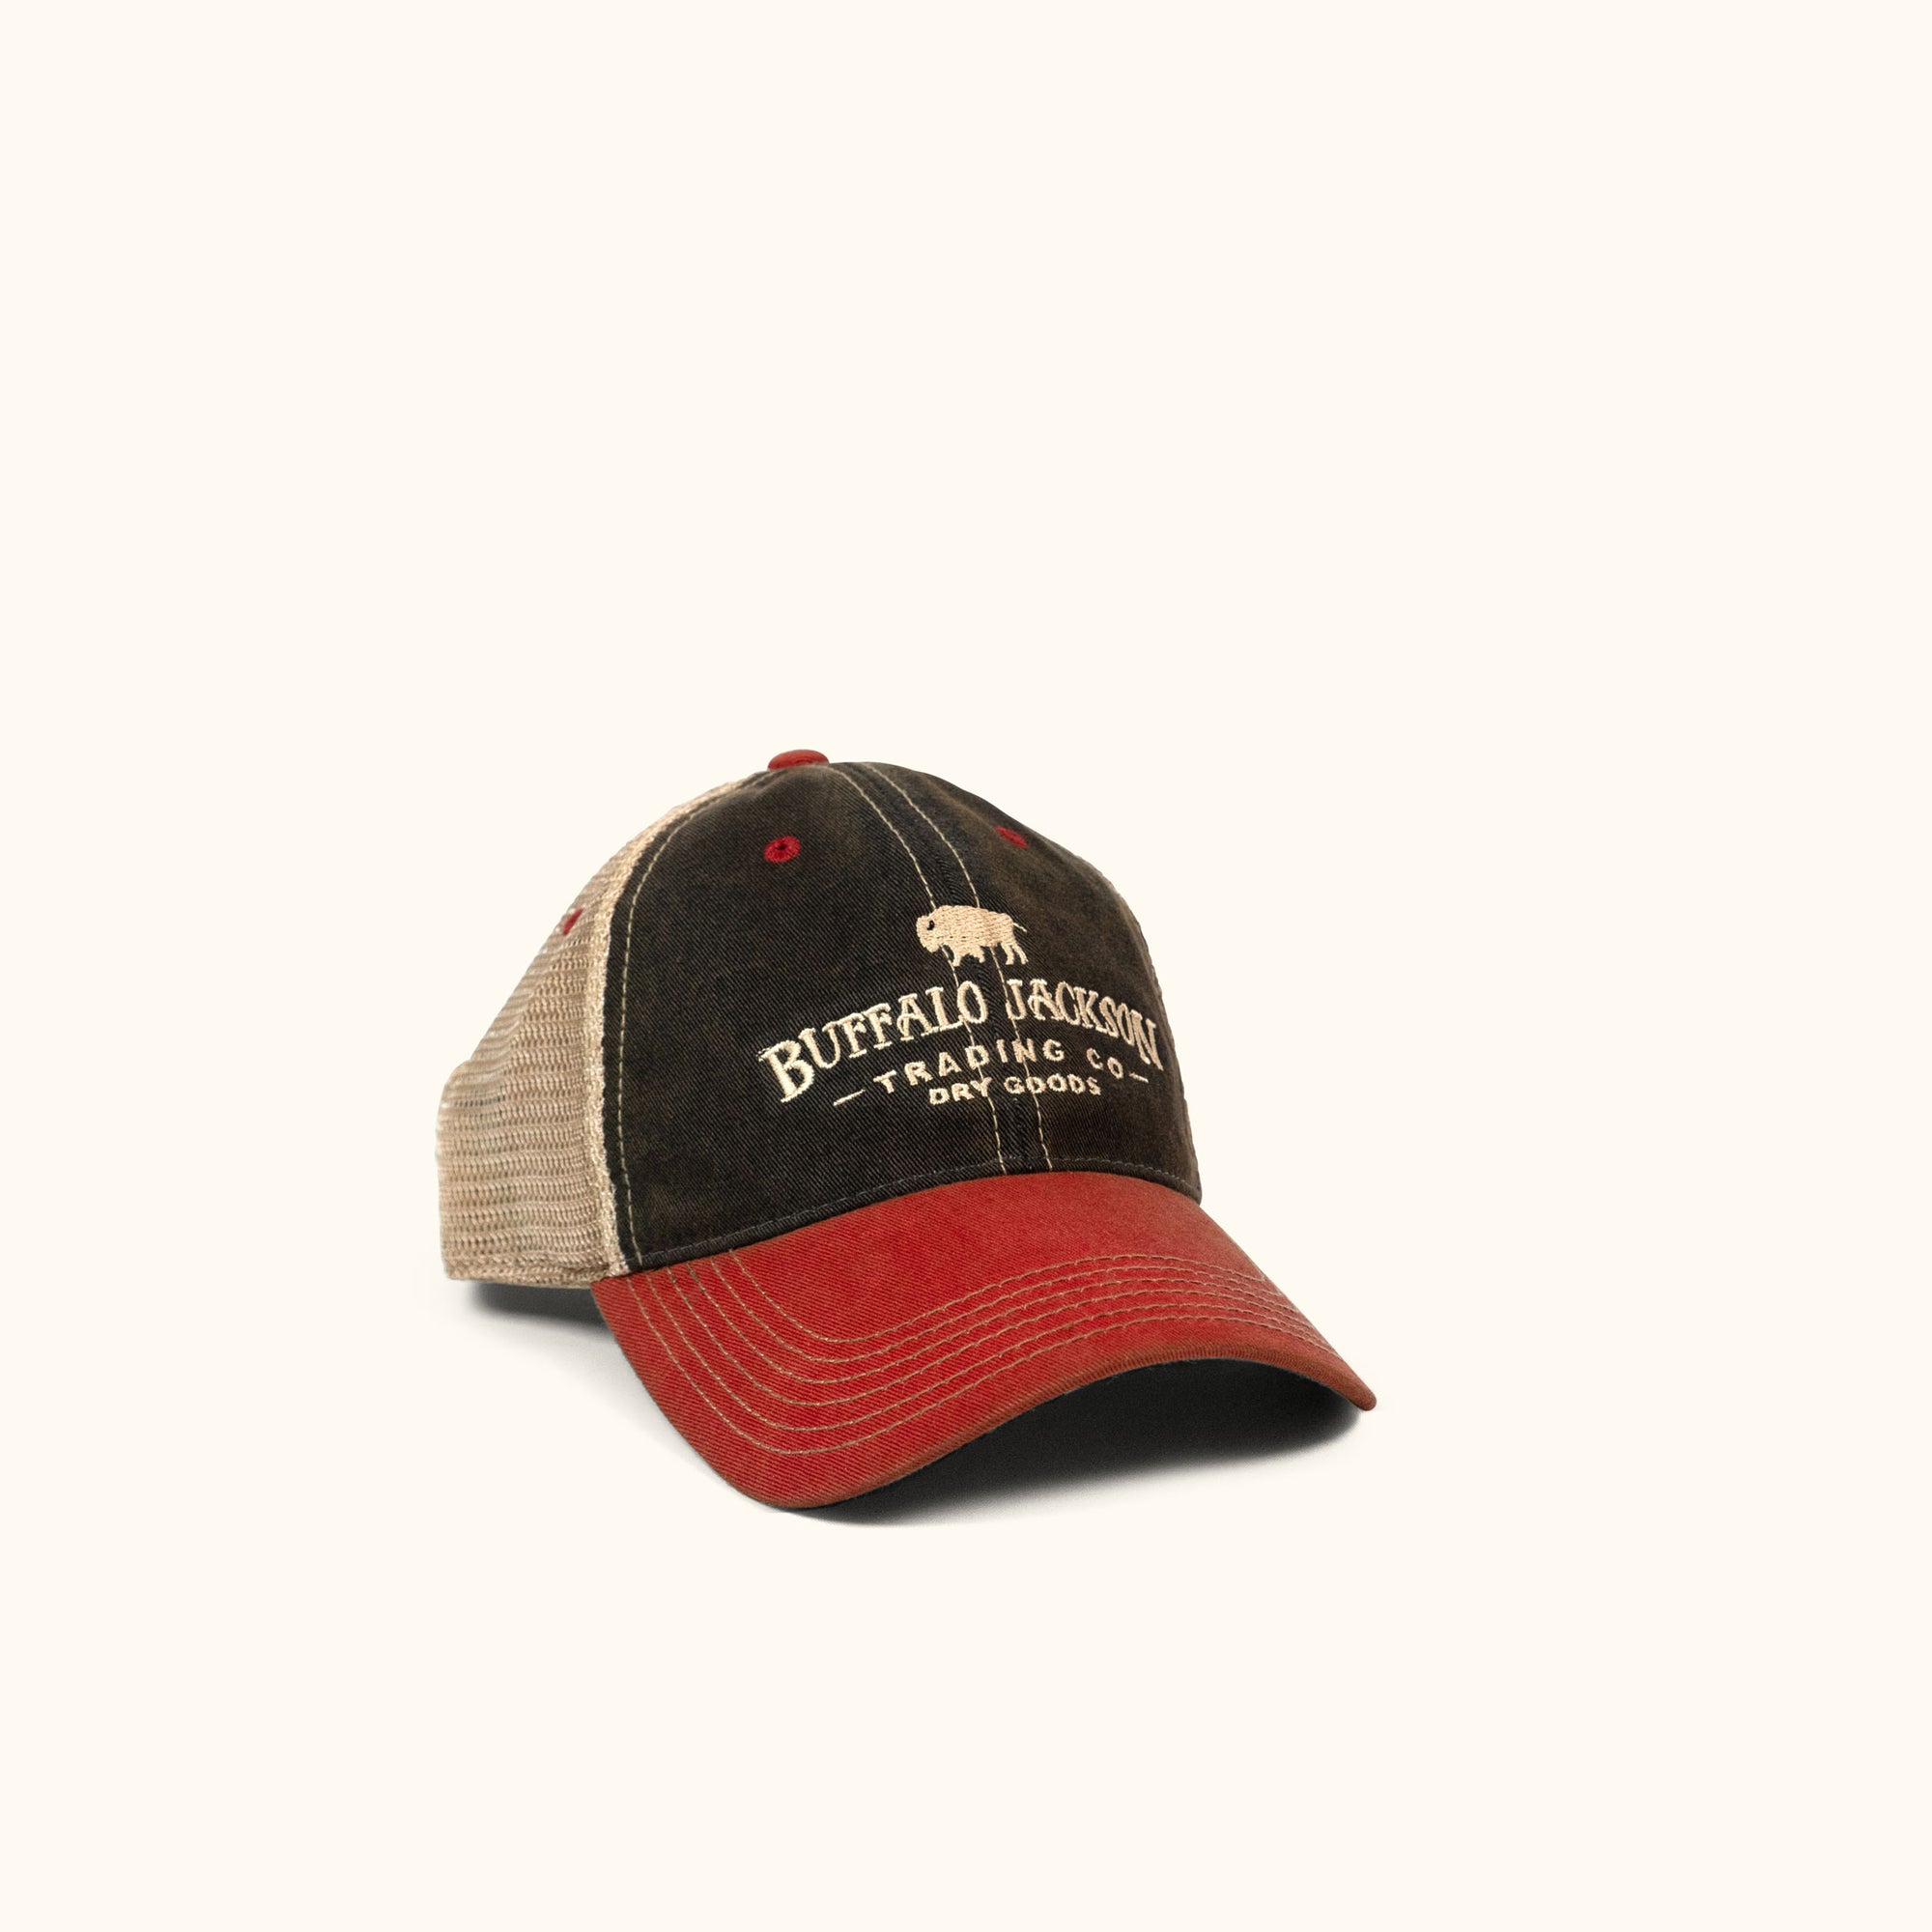 Buffalo Jackson Vintage Trucker Hat, Red and Black